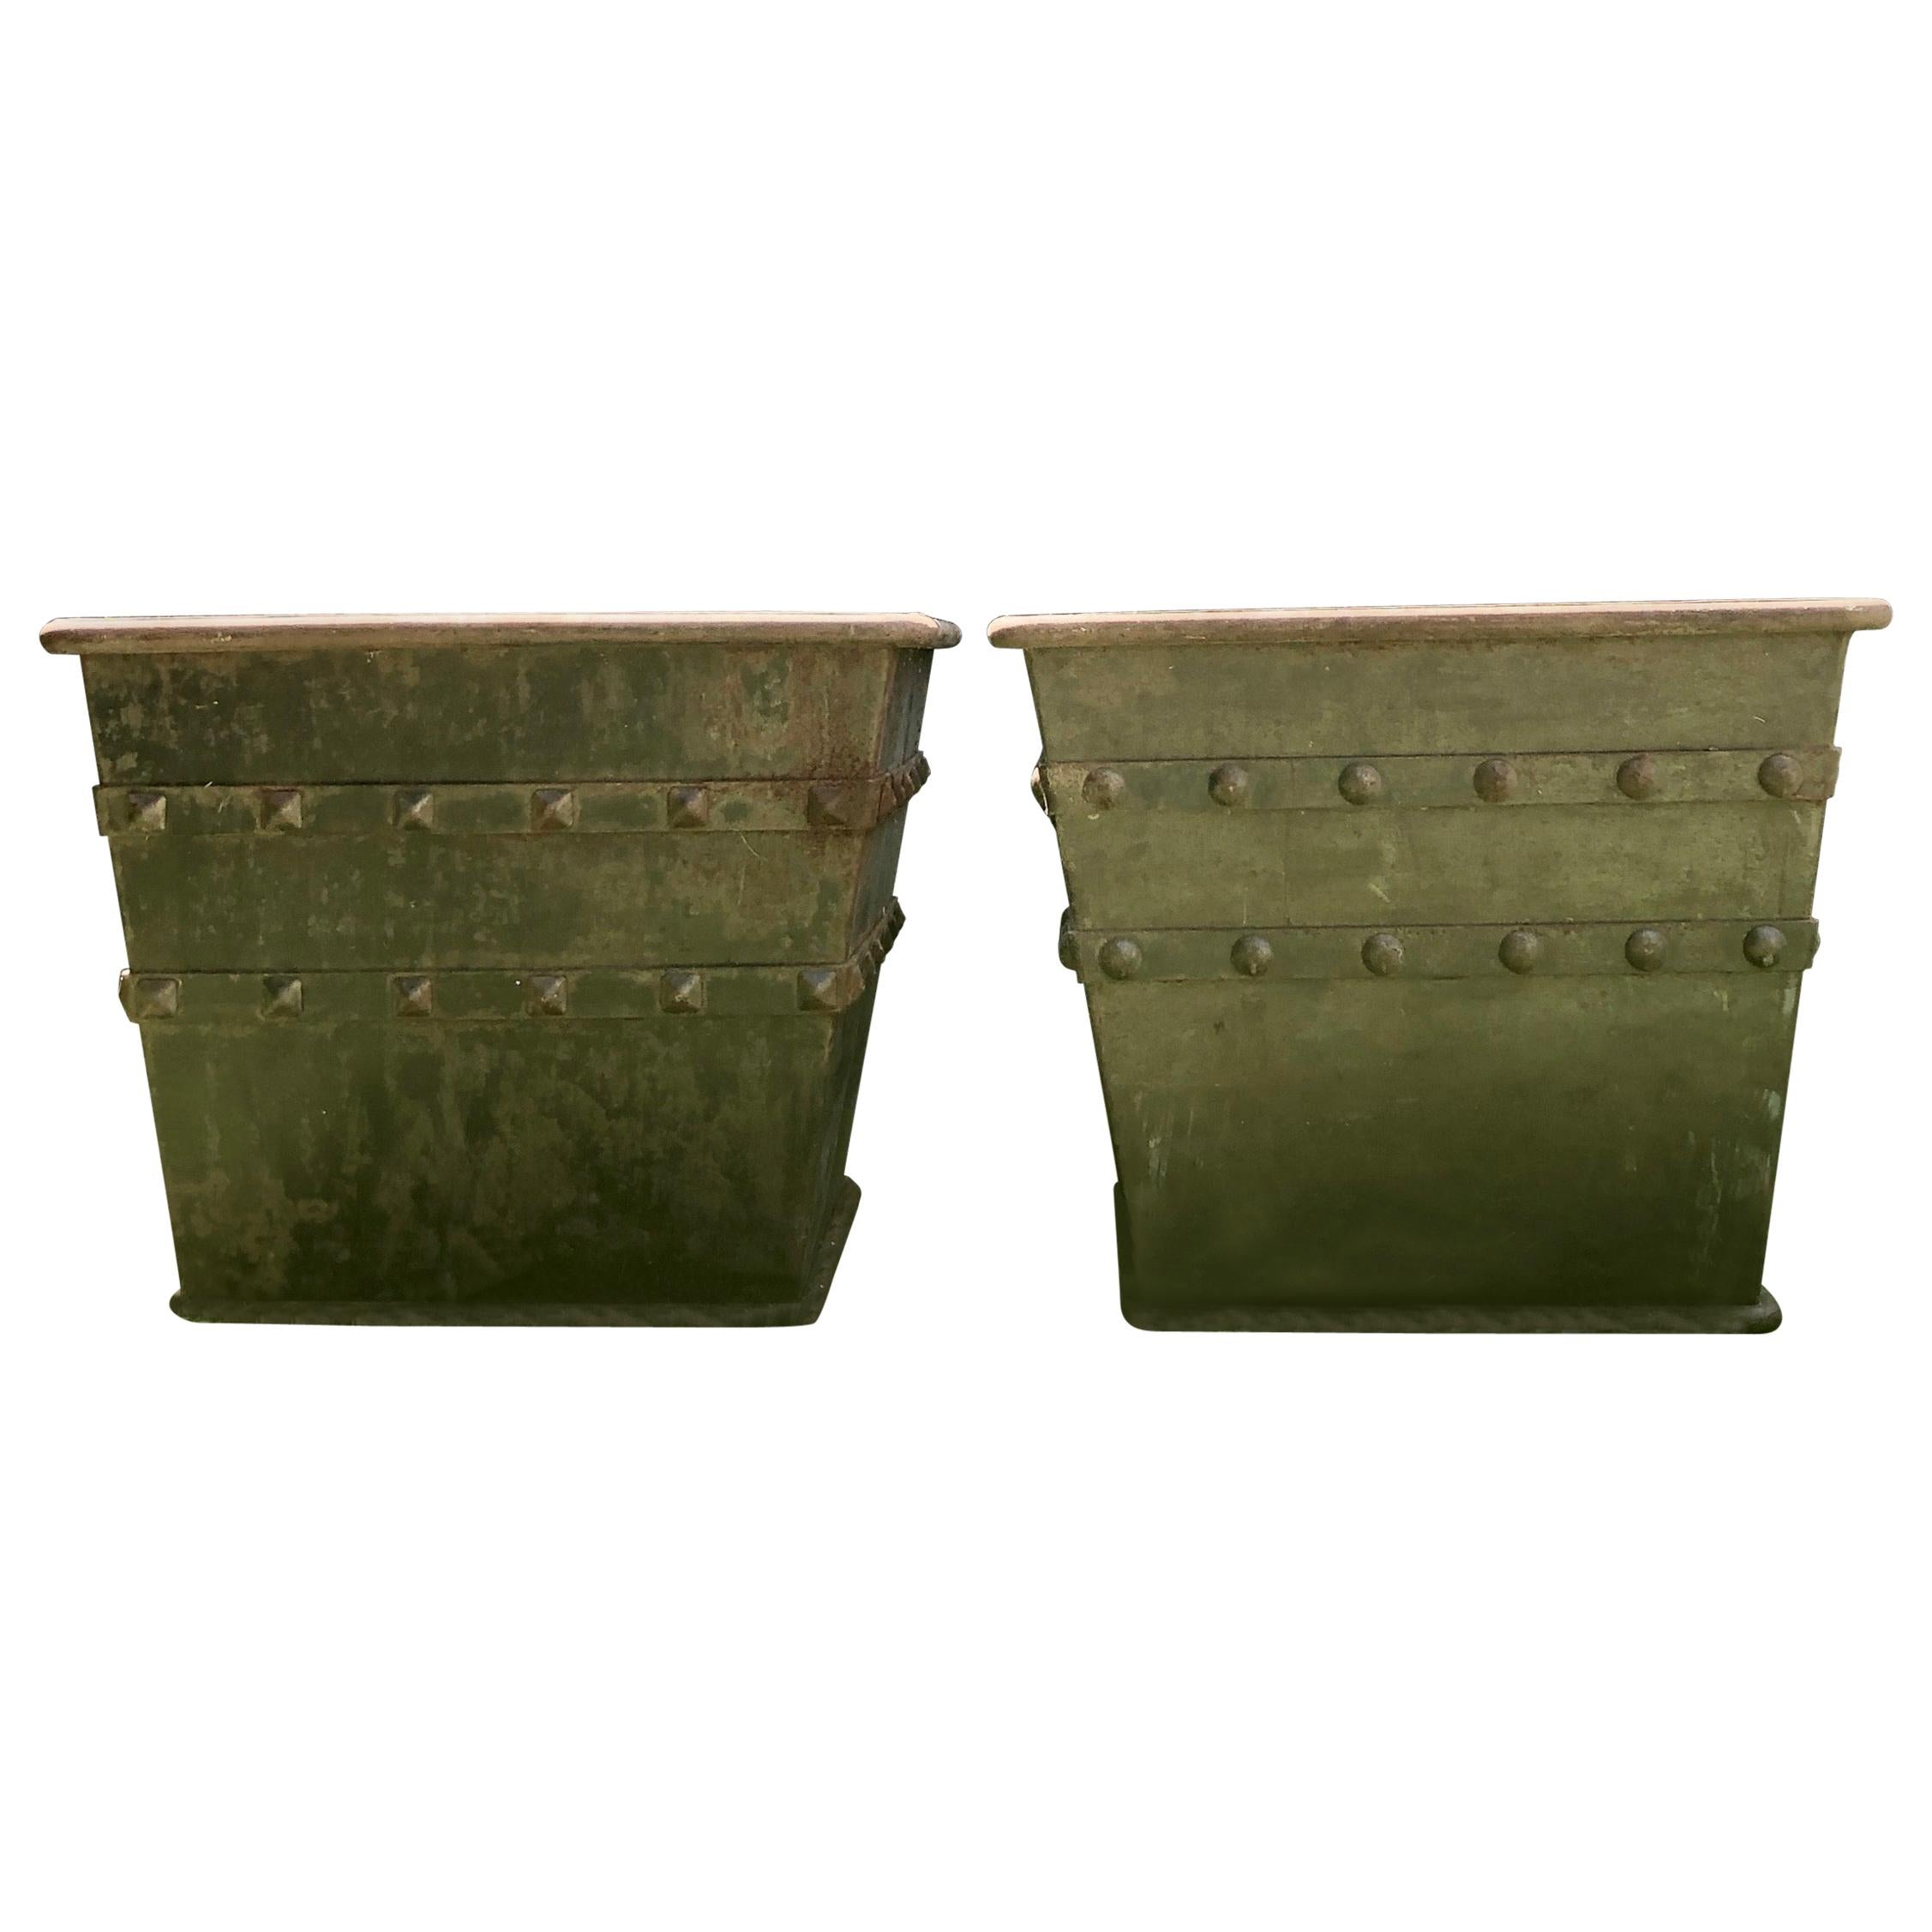 Pair of Huge French Iron Box Planters with Studded Decoration